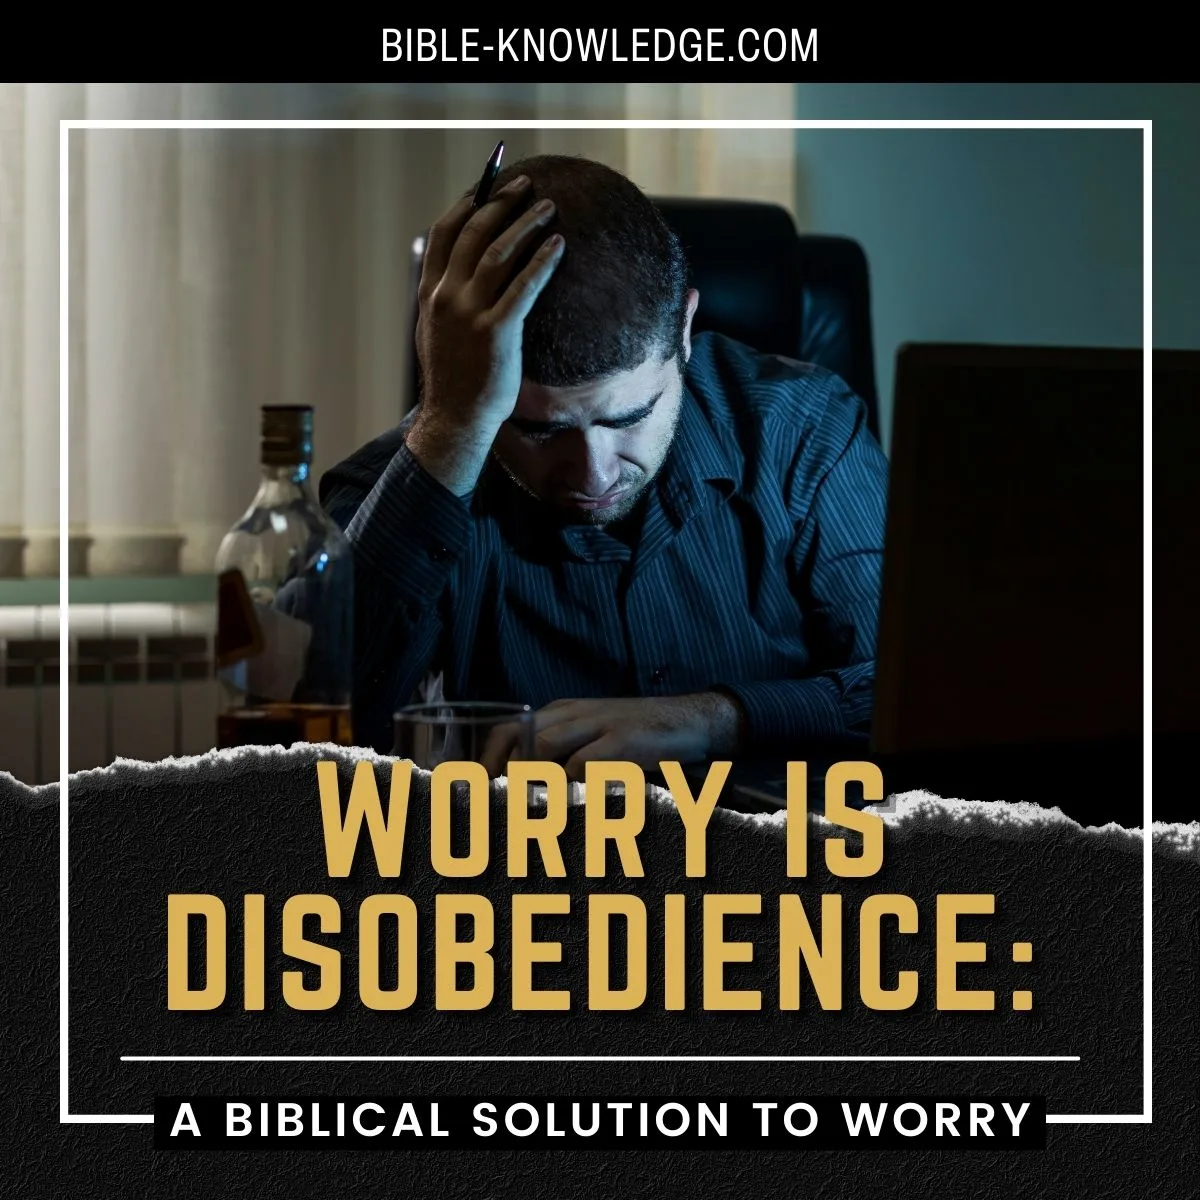 A Biblical Solution to Worry